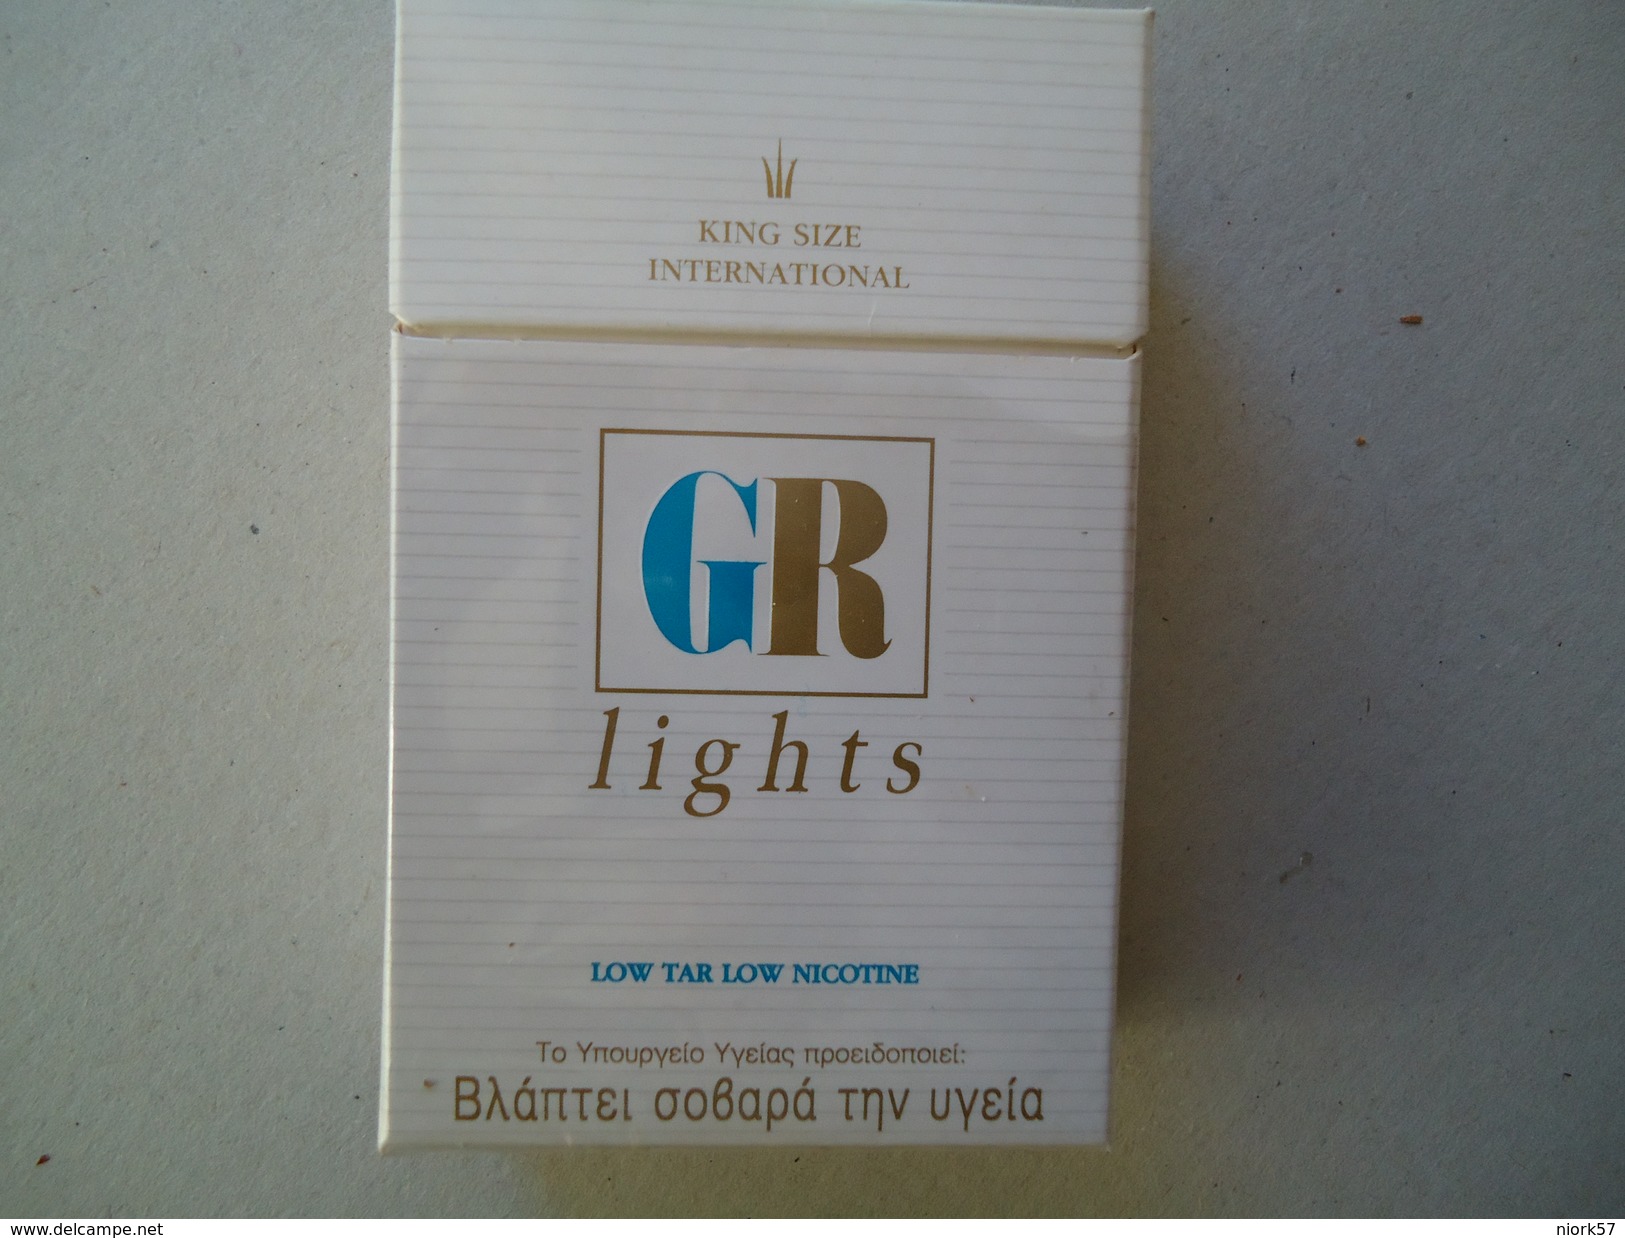 GREECE EMPTY TOBACCO BOXES IN DRACHMAS  GR LIGHTS - Boites à Tabac Vides